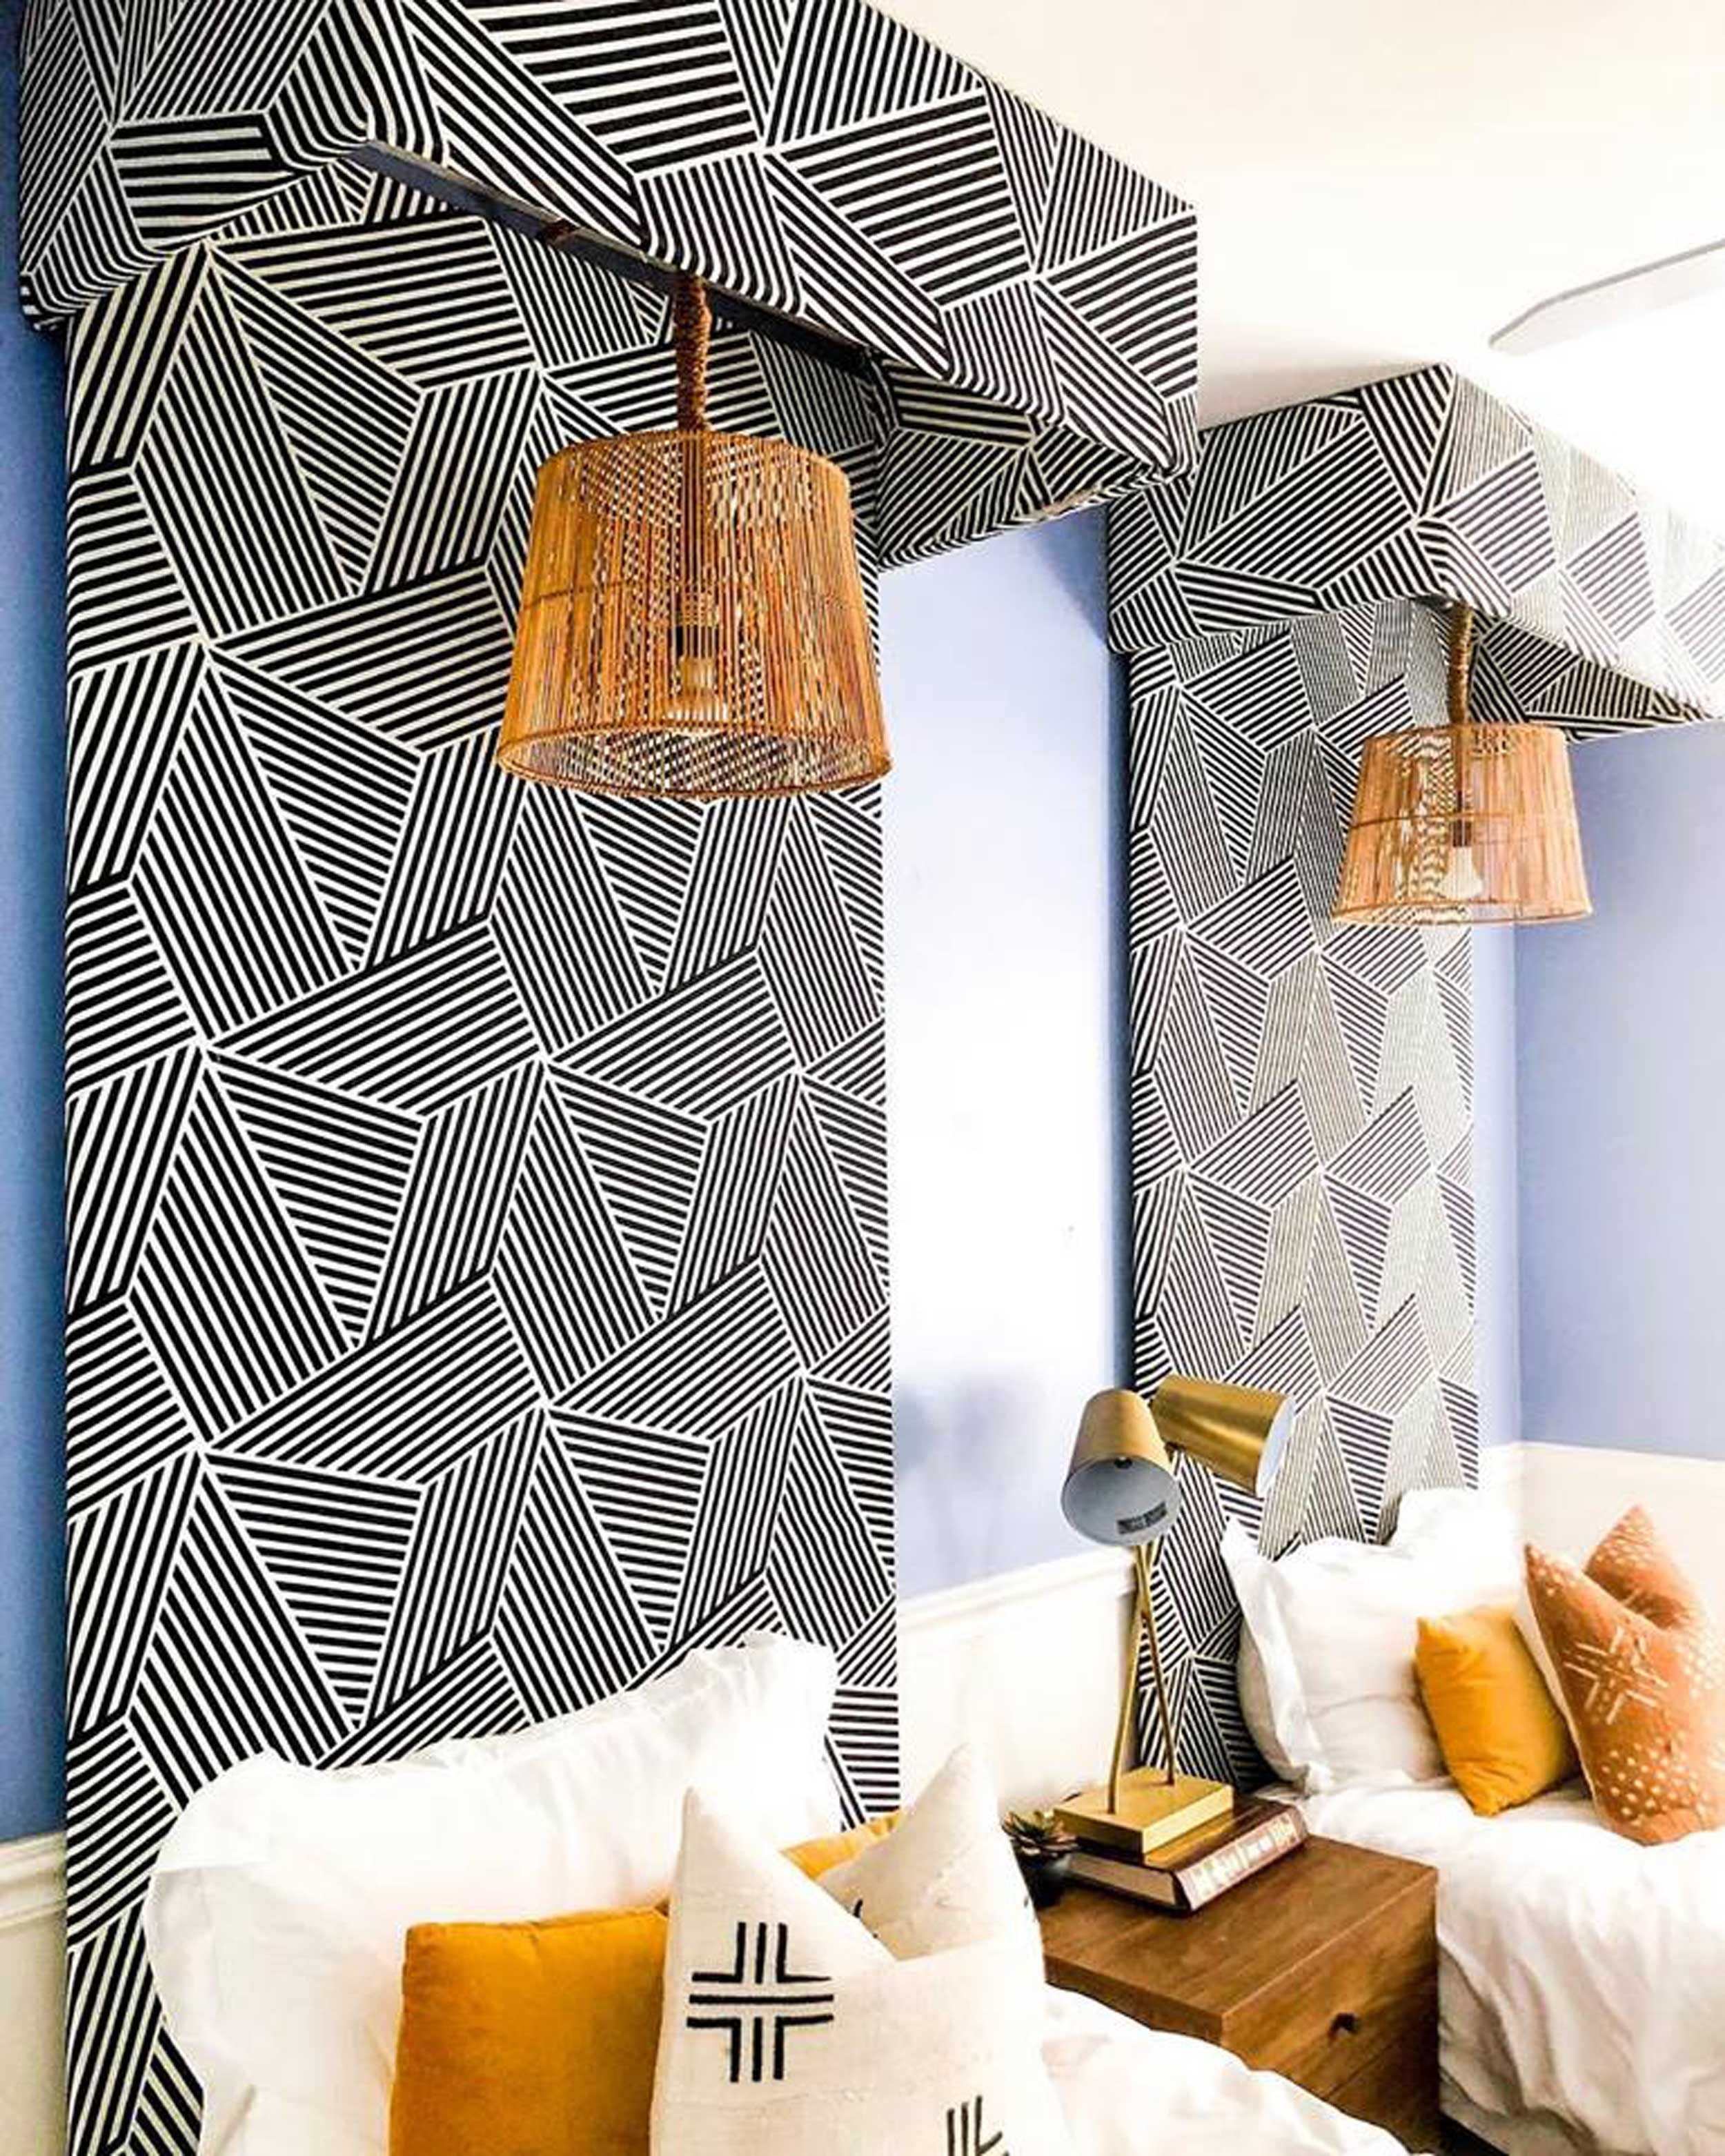 12 DIY Headboards That Everyone Will Think You Actually Bought - Emily Henderson - 12 DIY Headboards That Everyone Will Think You Actually Bought - Emily Henderson -   19 diy Bedroom headboards ideas